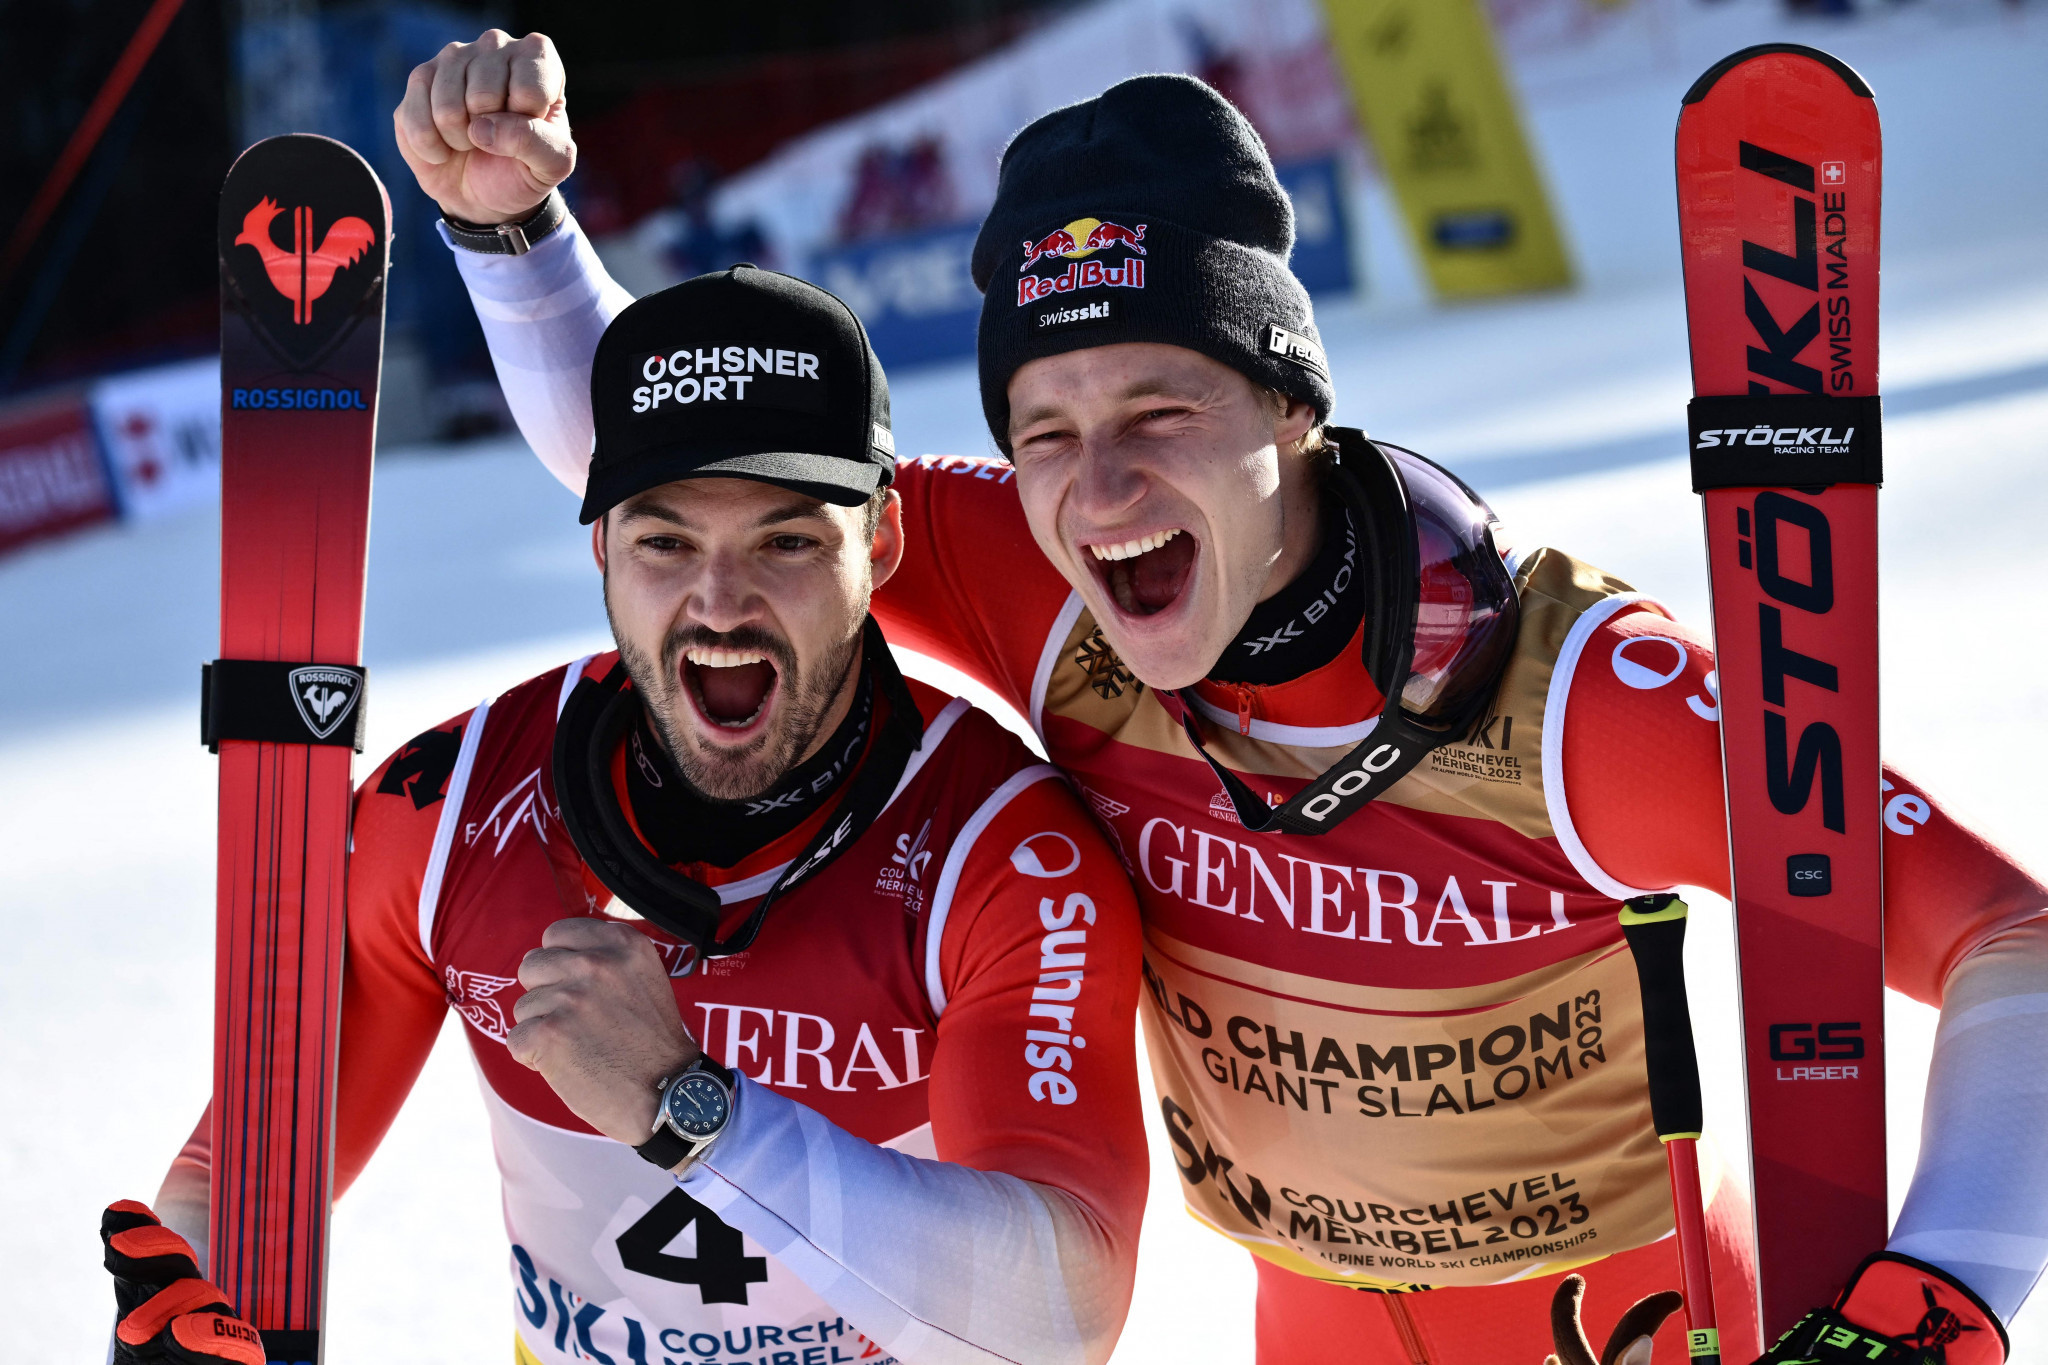 Loïc Meillard, left, produced a superb second run to earn silver with fellow Swiss skier Marco Odermatt, right ©Getty Images